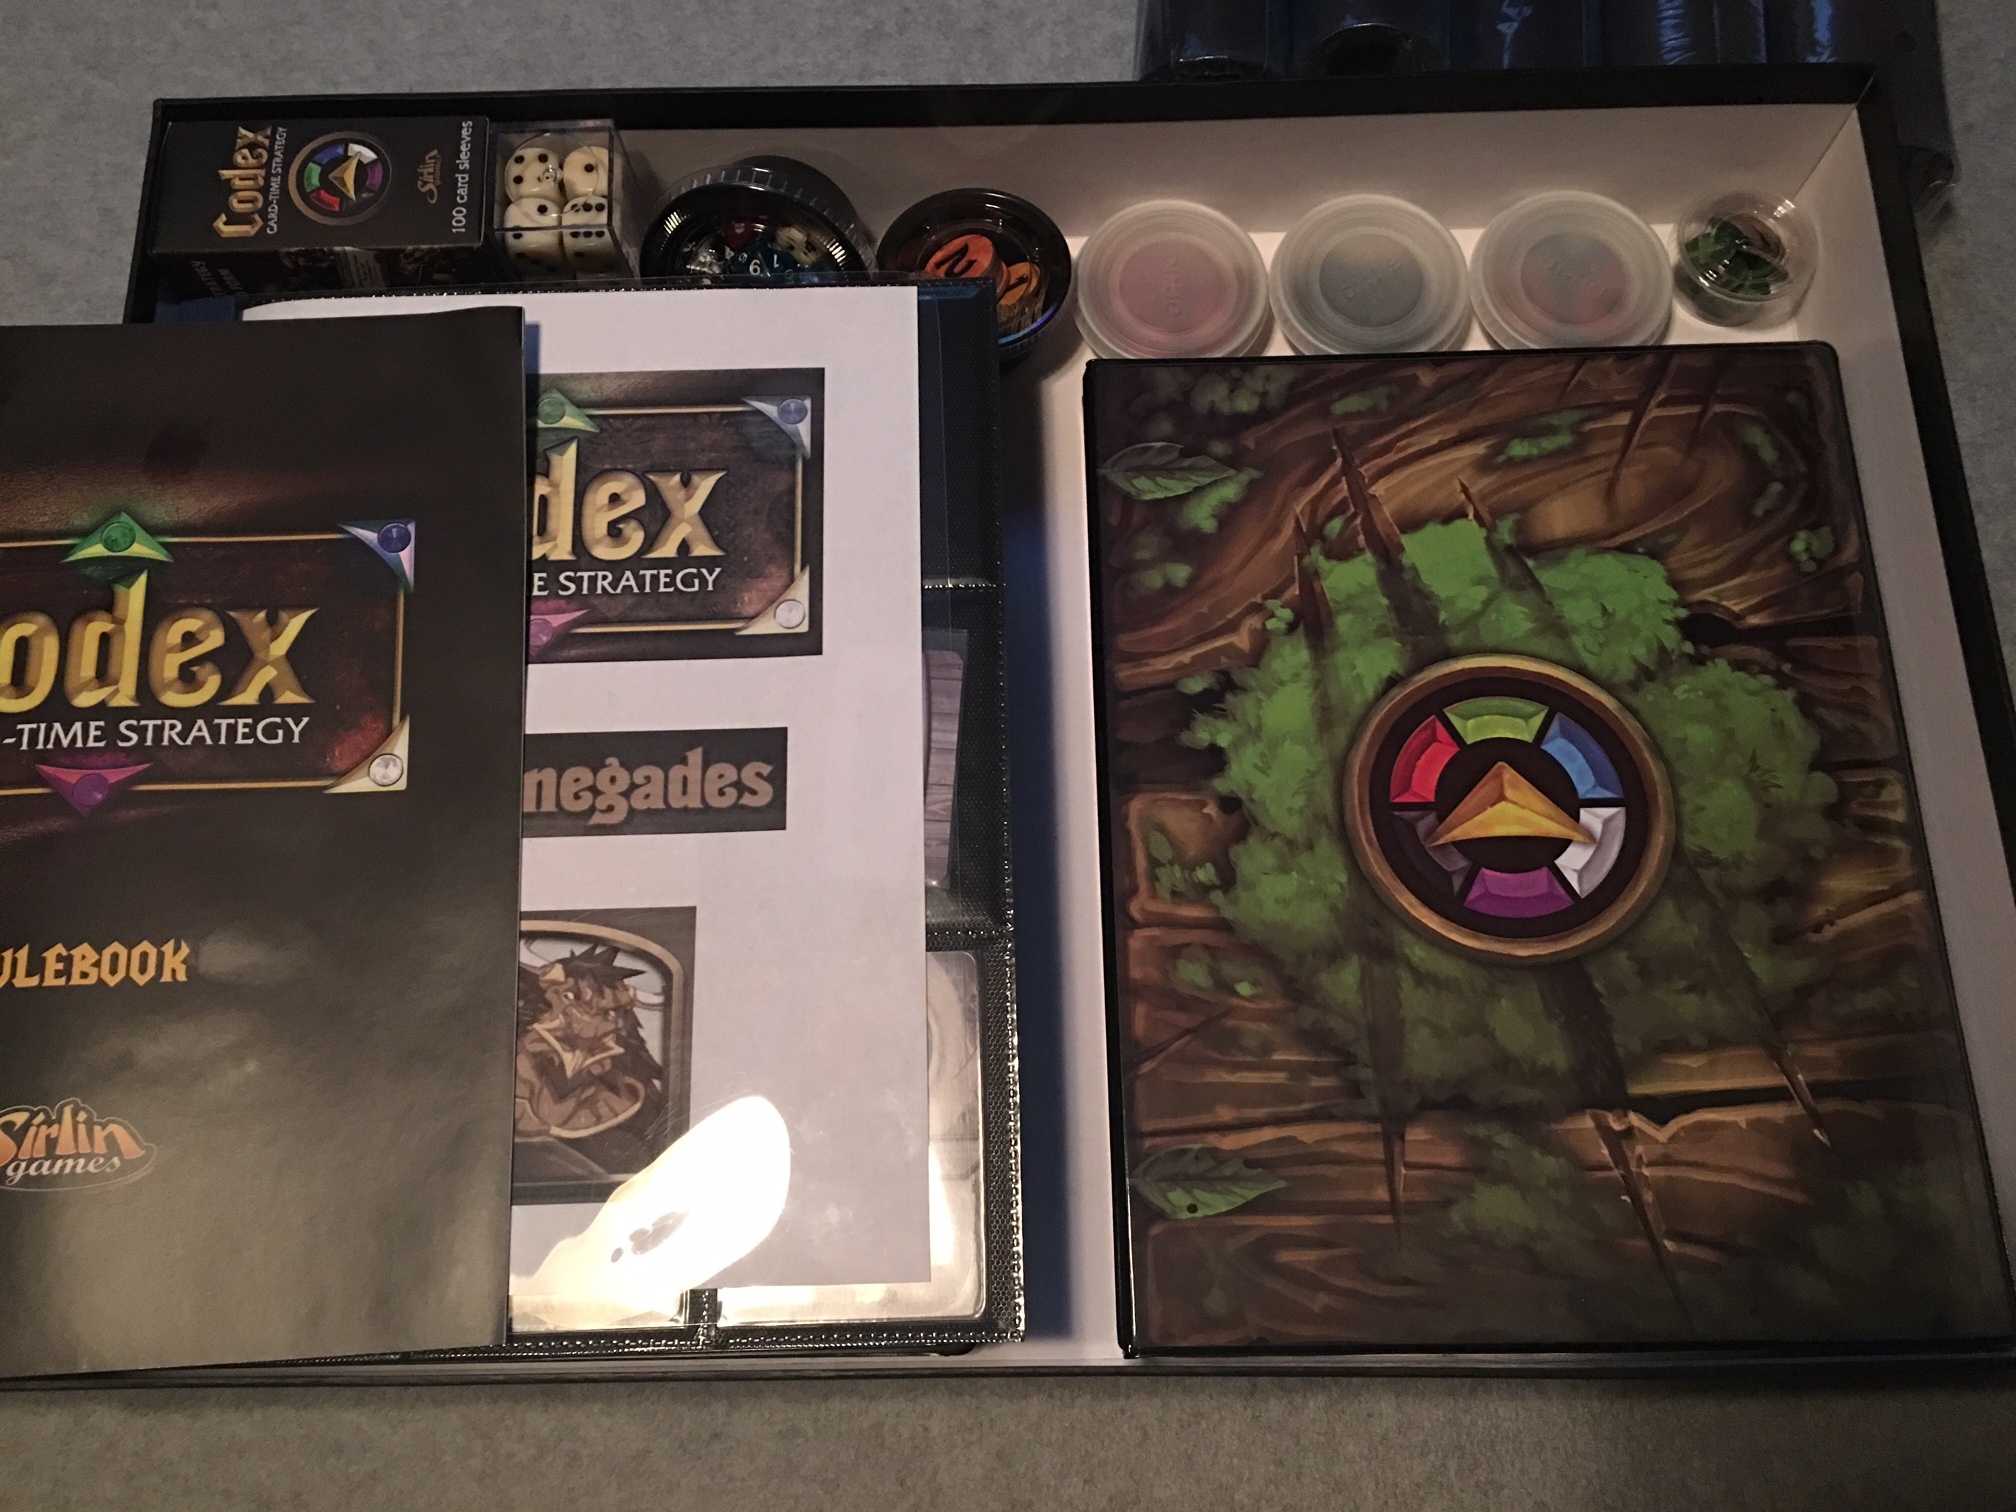 Nearly) Complete Codex Deluxe component storage and travel approach - #16  by TheJTrain - Codex - Sirlin Games